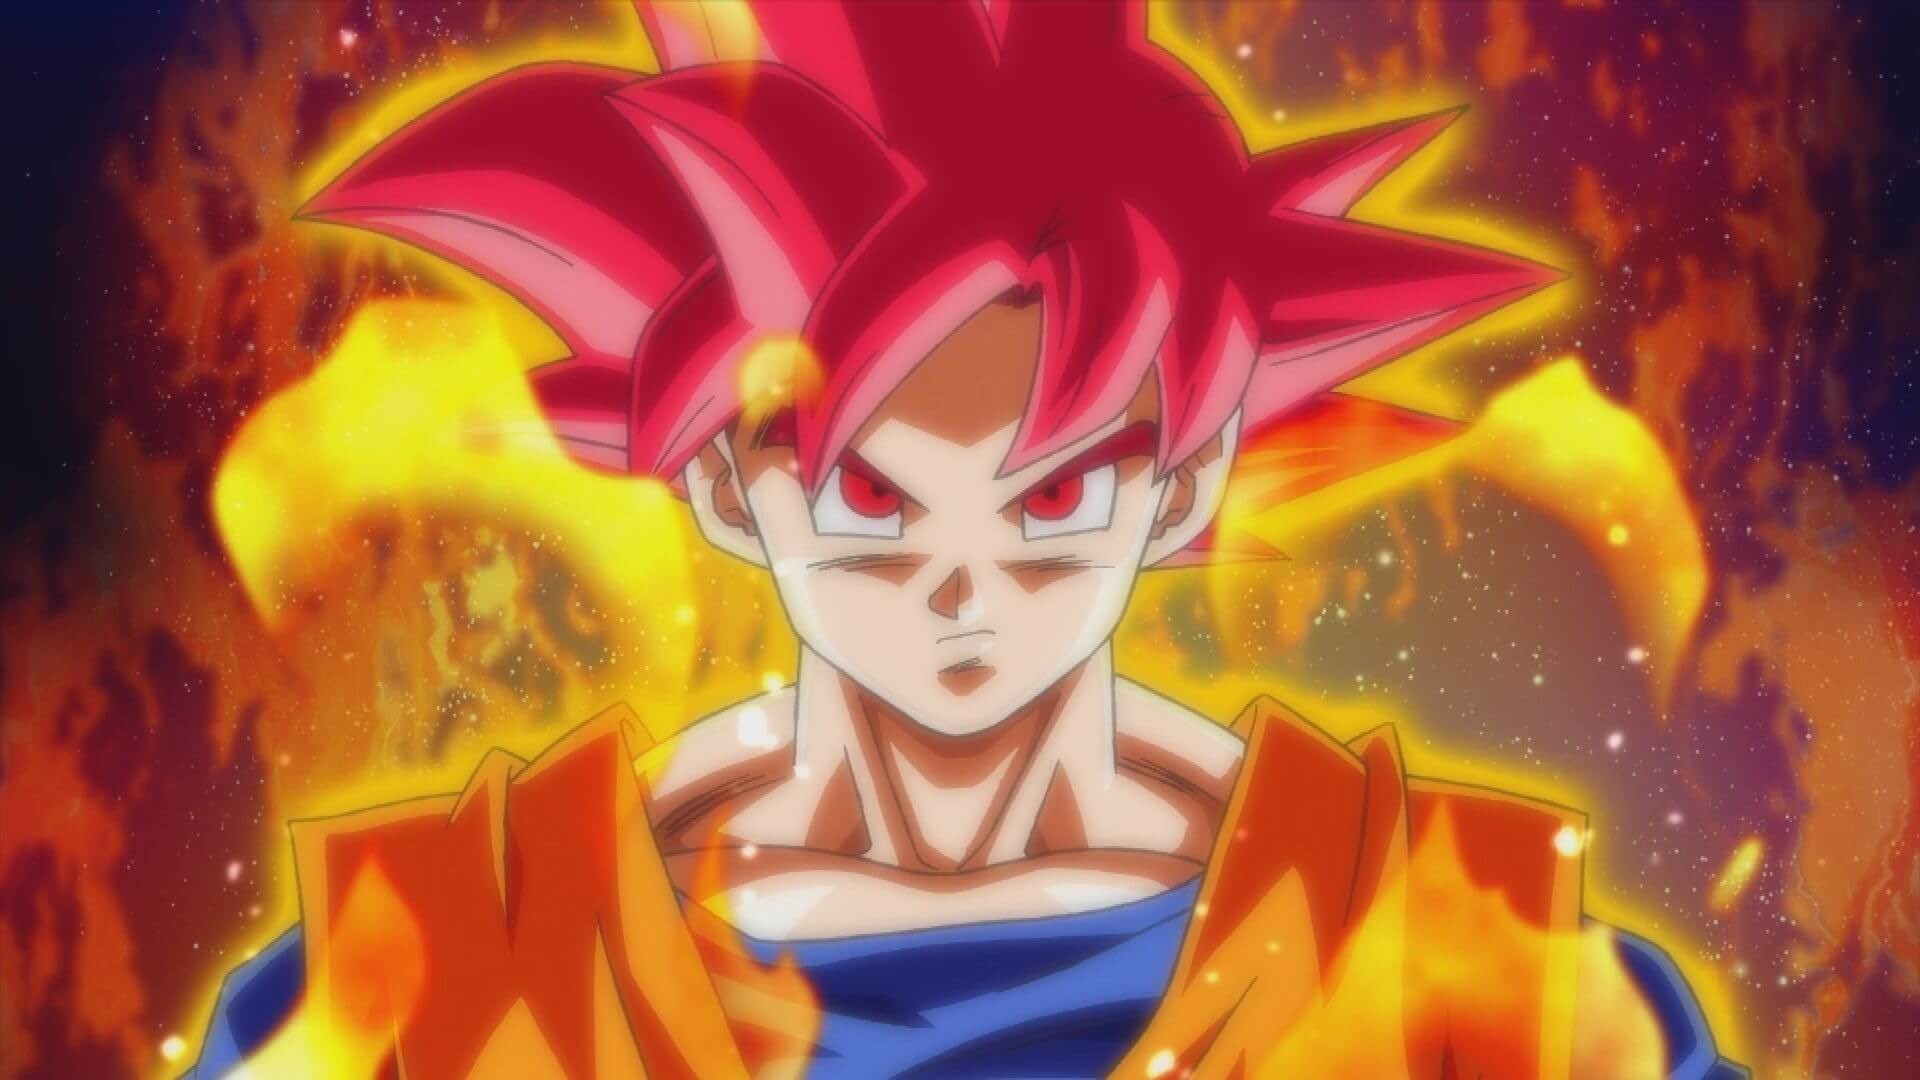 Goku Super Saiyan God Desktop Backgrounds HD with image resolution 1920x1080 pixel. You can use this wallpaper as background for your desktop Computer Screensavers, Android or iPhone smartphones